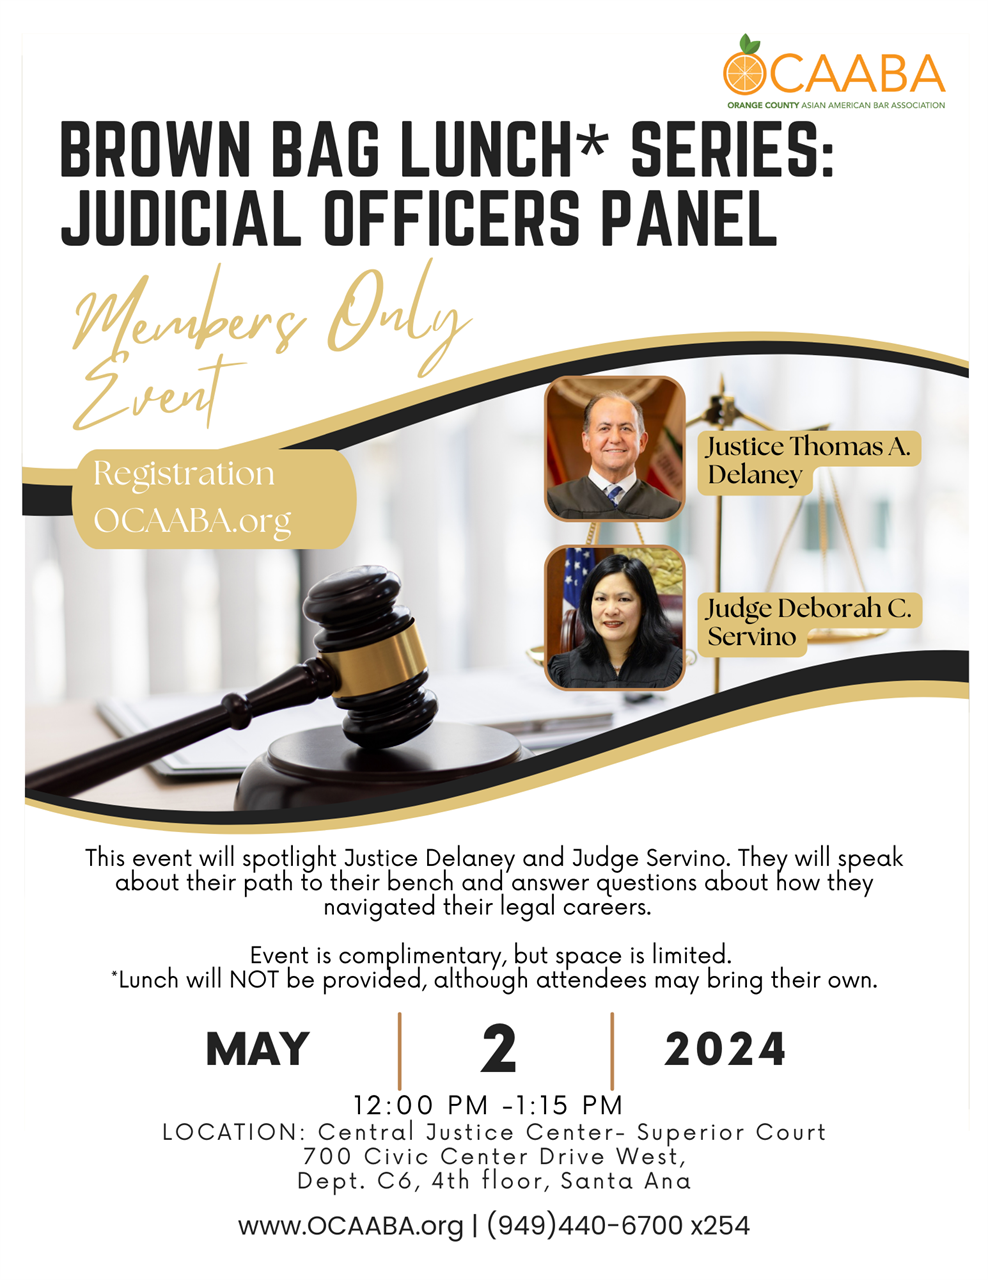 This event will spotlight Justice Delaney and Judge Servino. They will speak about their path to their bench and answer questions about how they navigated their legal careers. Event is complimentary, but space is limited. *Lunch will NOT be provided, although attendees may bring their own.